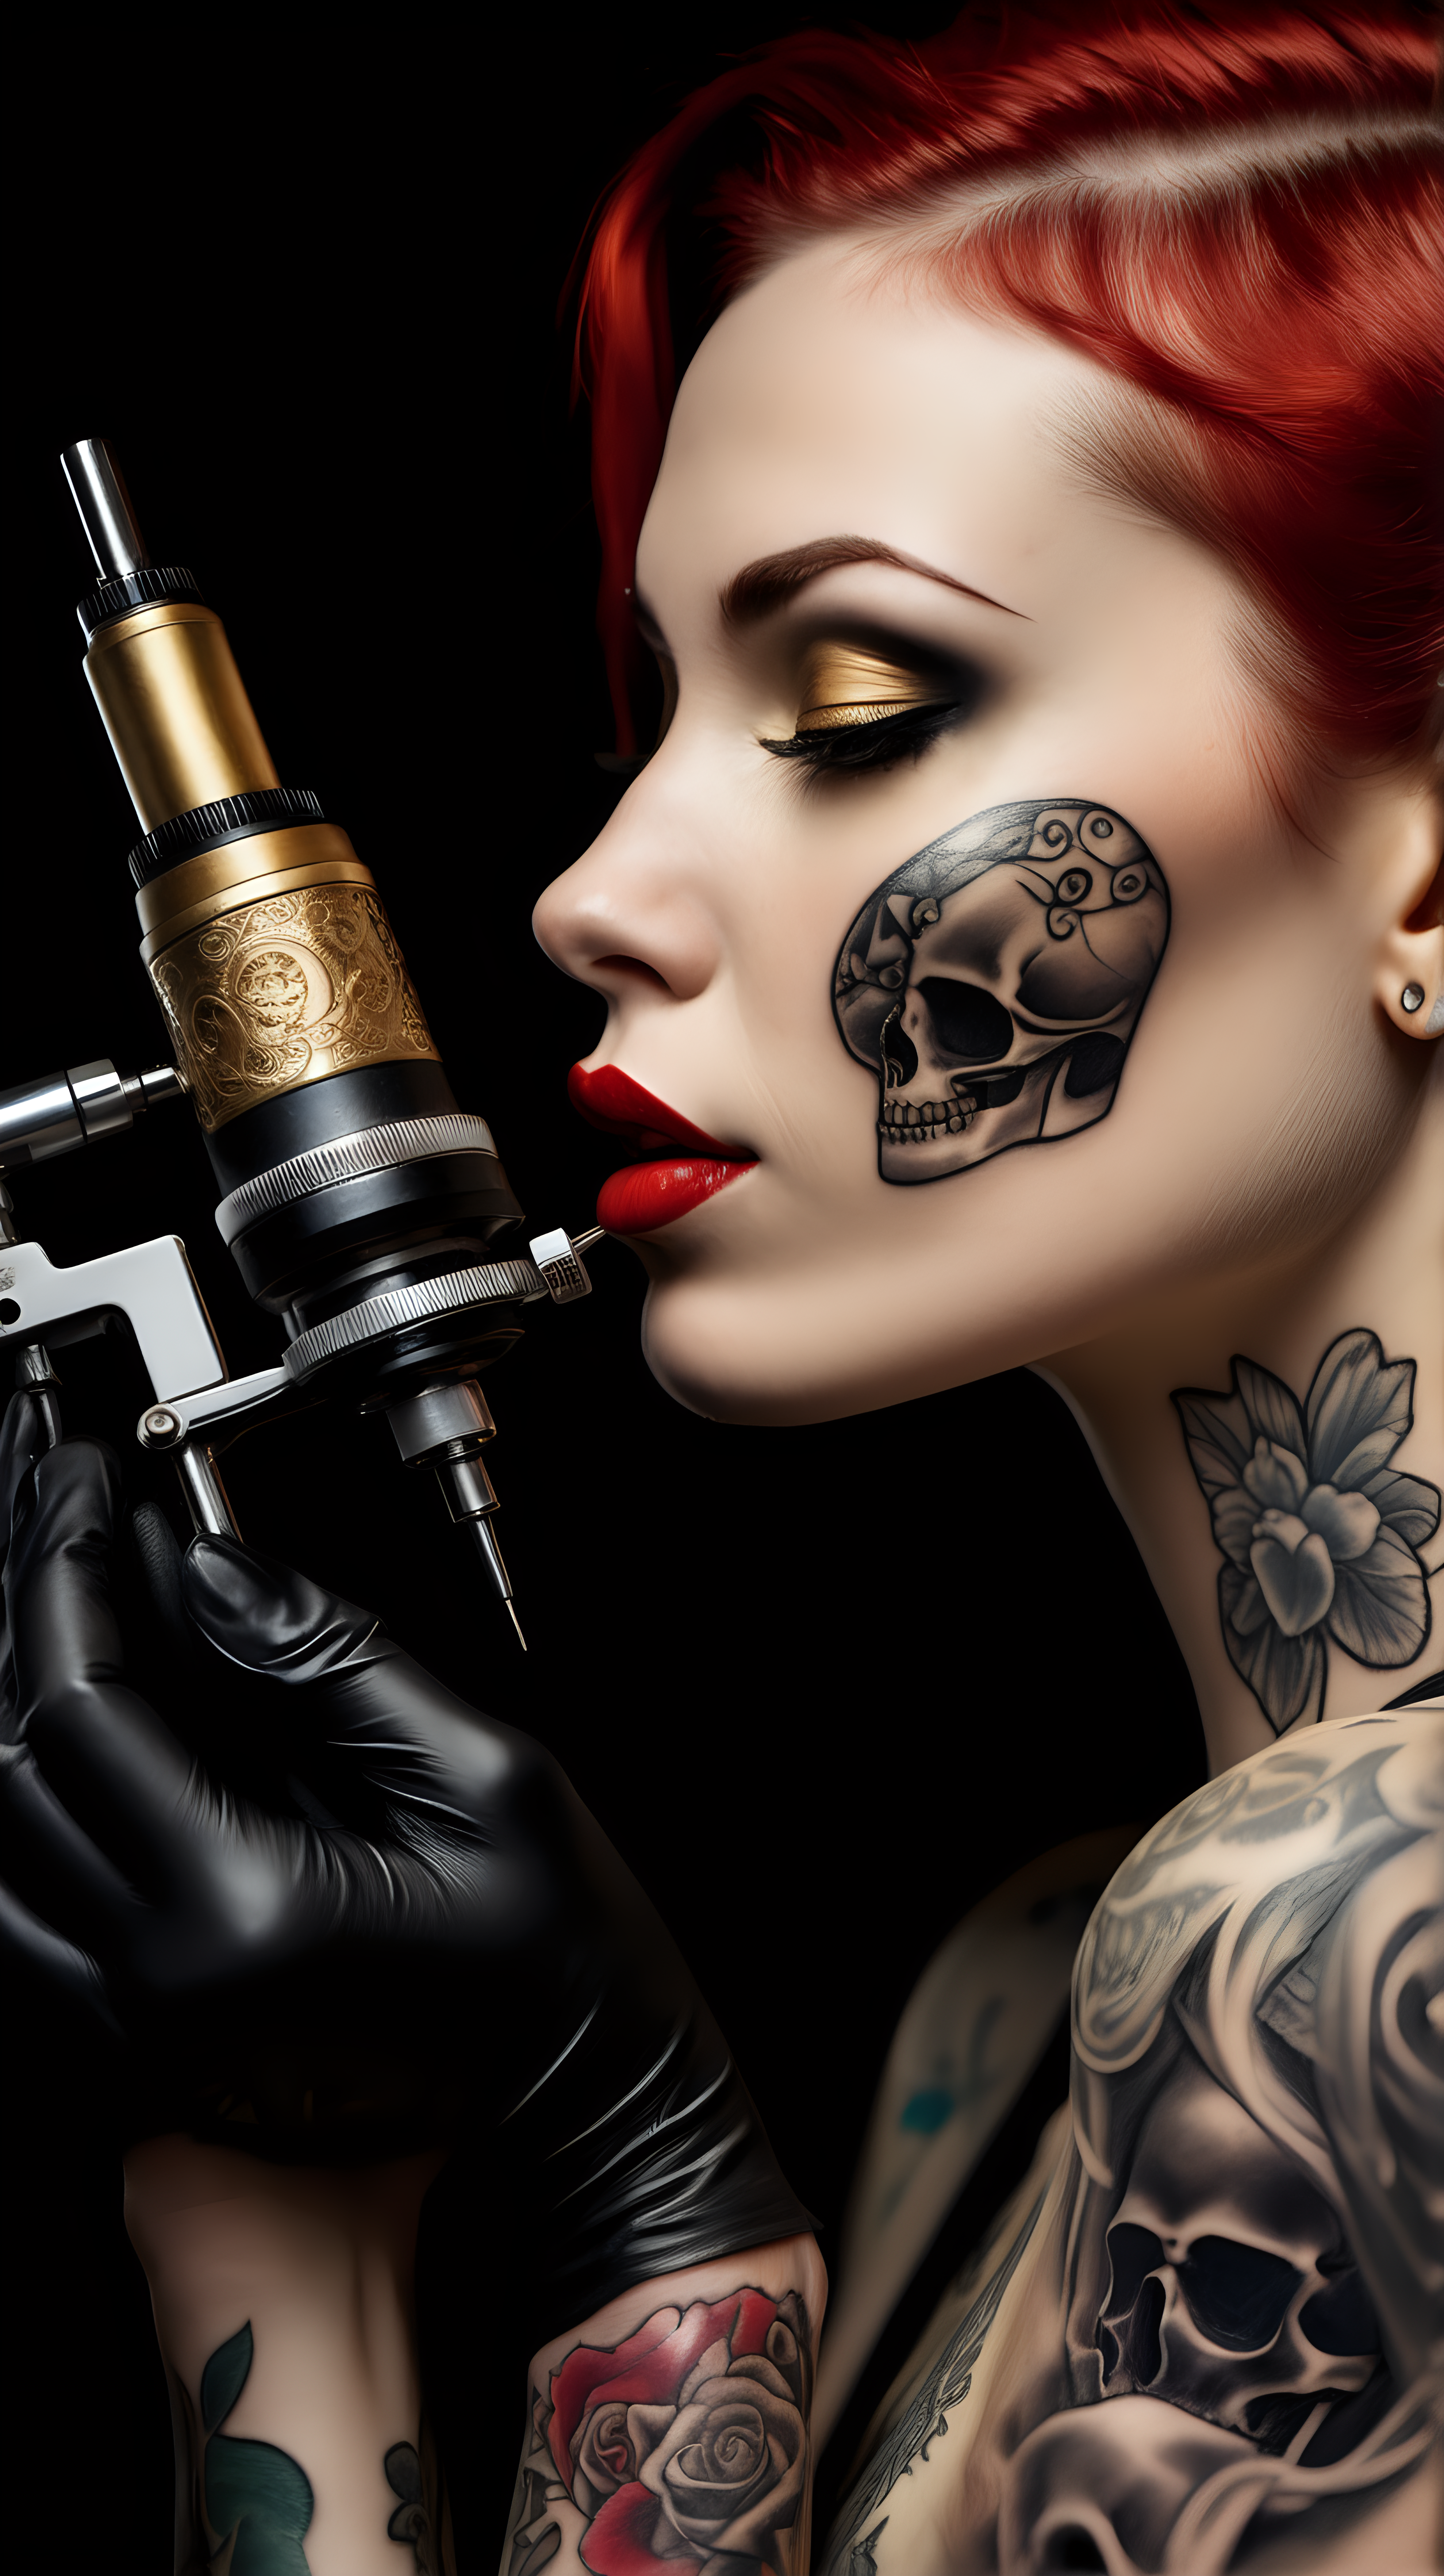 /imagine prompt : An ultra-realistic photograph captured with a canon 5d mark III camera, equipped with an macro lens at F 5.8 aperture setting, The camera is directly in front of the subject, capturing a vintage classic tattoo machine /describe : a pattern of the skull is engraved on golden tattoo grip , grabbed by a hand wearing black nitrile gloves . A beautiful woman whose only lips are visible in the picture is sensually kissing the needle of the tattoo machine with her very red lips.
the hand is blurred and the focus sets on tattoo machine .
Soft spot light gracefully illuminates the subject and golden grip is shining. The background is absolutely black , highlighting the subject.
The image, shot in high resolution and a 16:9 aspect ratio, captures the subject’s  with stunning realism –ar 9:16 –v 5.2 –style raw
